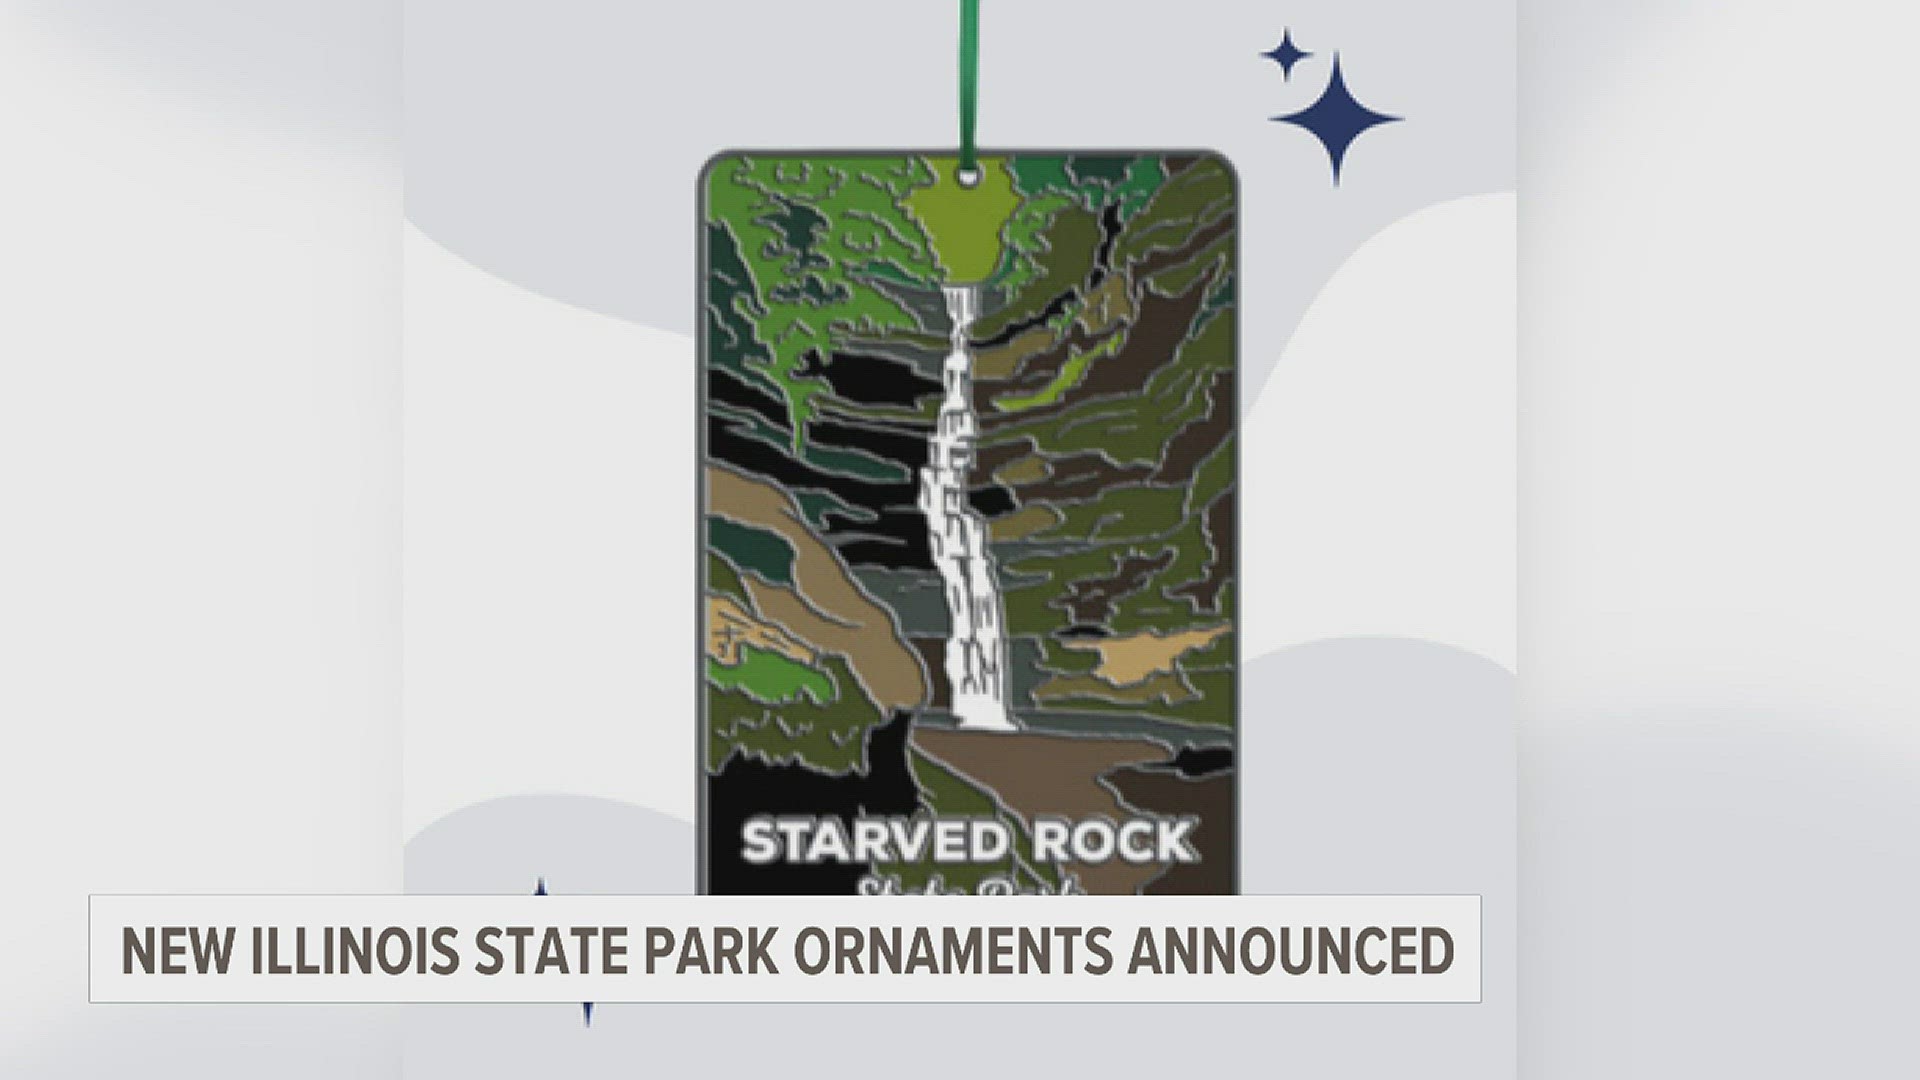 The first in the series depicts Starved Rock State Park.